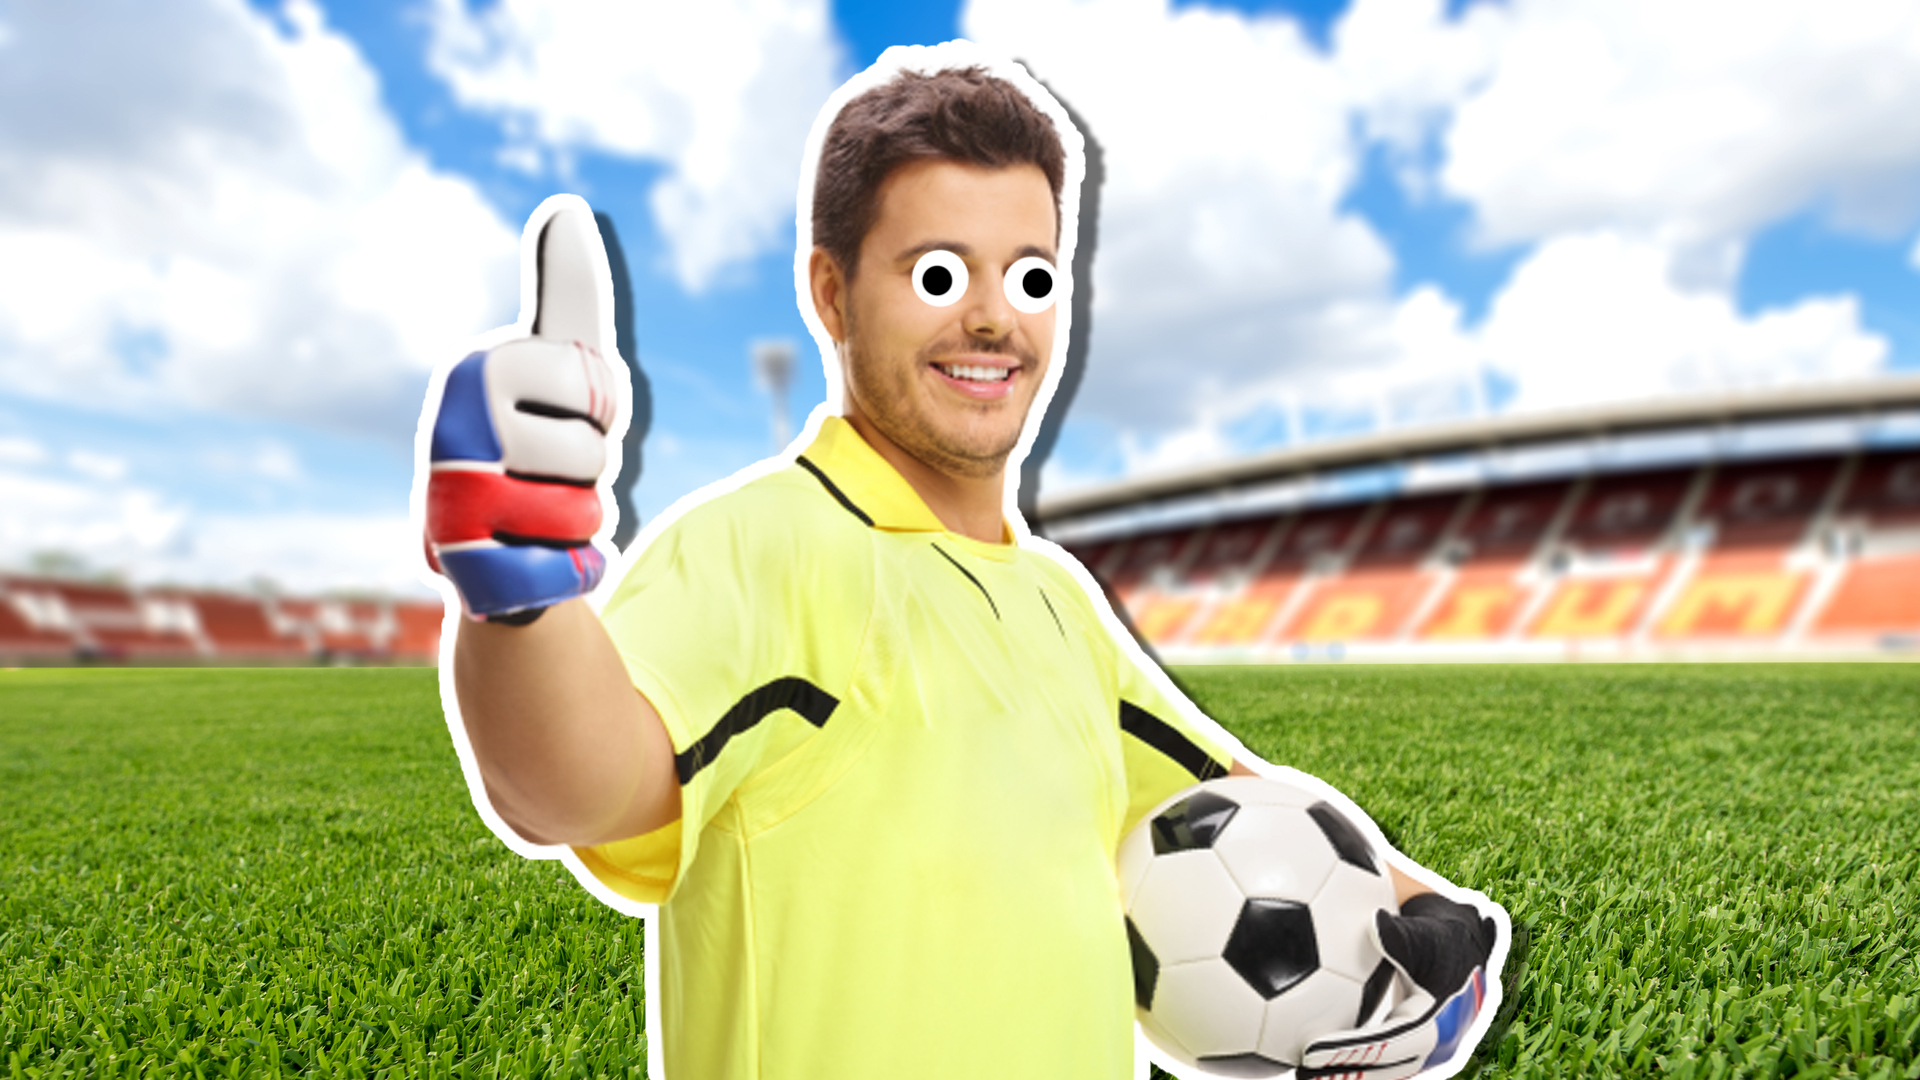 A goalkeeper giving the thumbs up because of your stylish choices